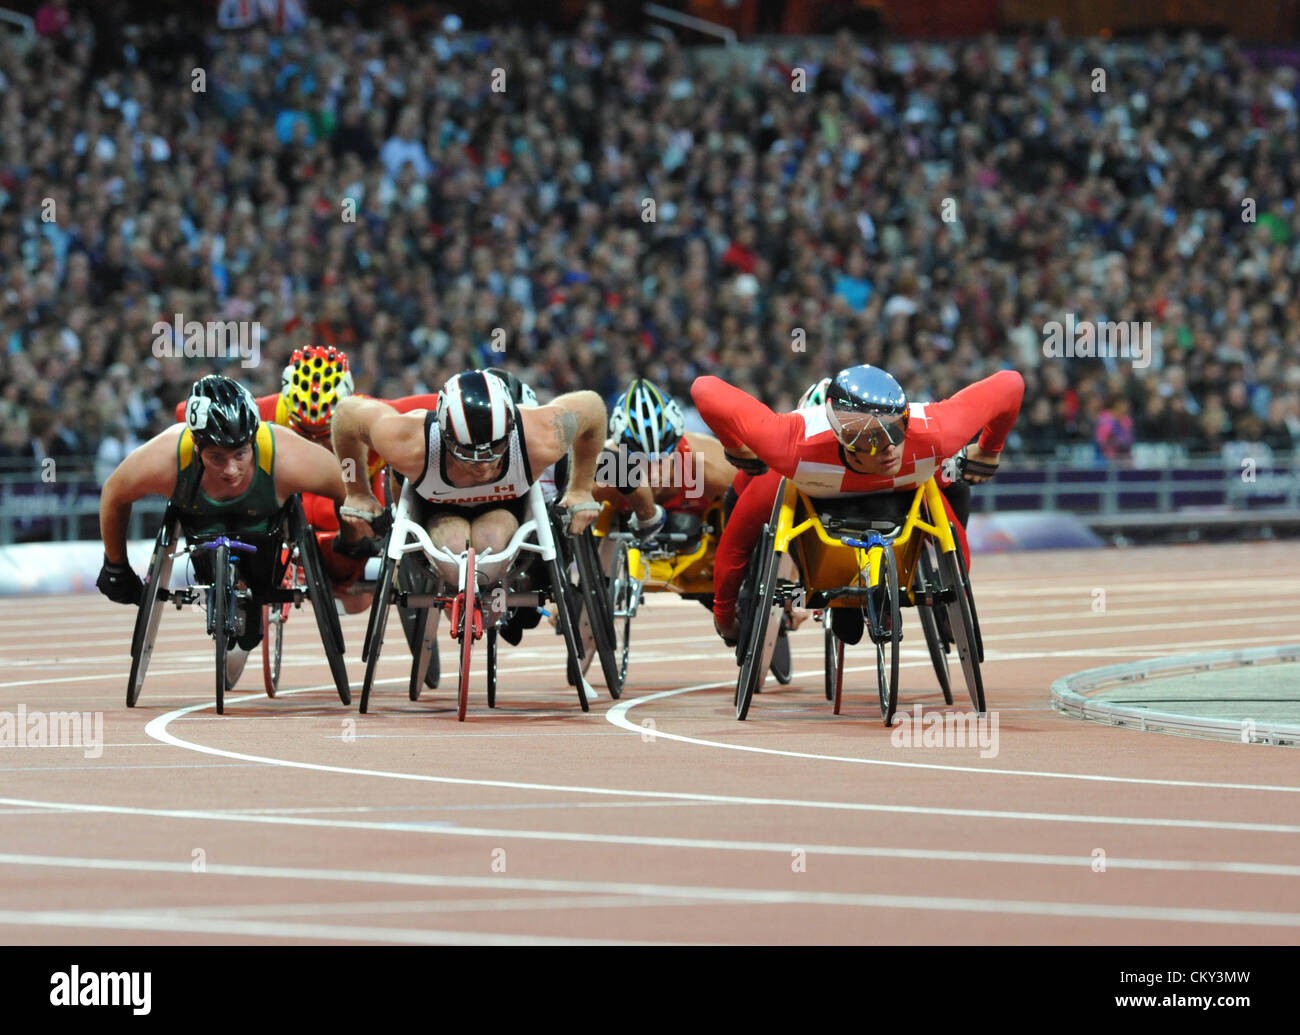 London, UK. 31st Aug 2012 - Marcell Hug (in reflective helmet and googles) leading the pack during a heat for the 5000m T54 race in the Olympic stadium at the 2012 London Summer Paralympics. Front row, right to left is: Natheniel Arkley (AUS), Josh Cassidy (CAN), Marcell Hug (SUI). (C) Michael Preston / Alamy Live News. Stock Photo